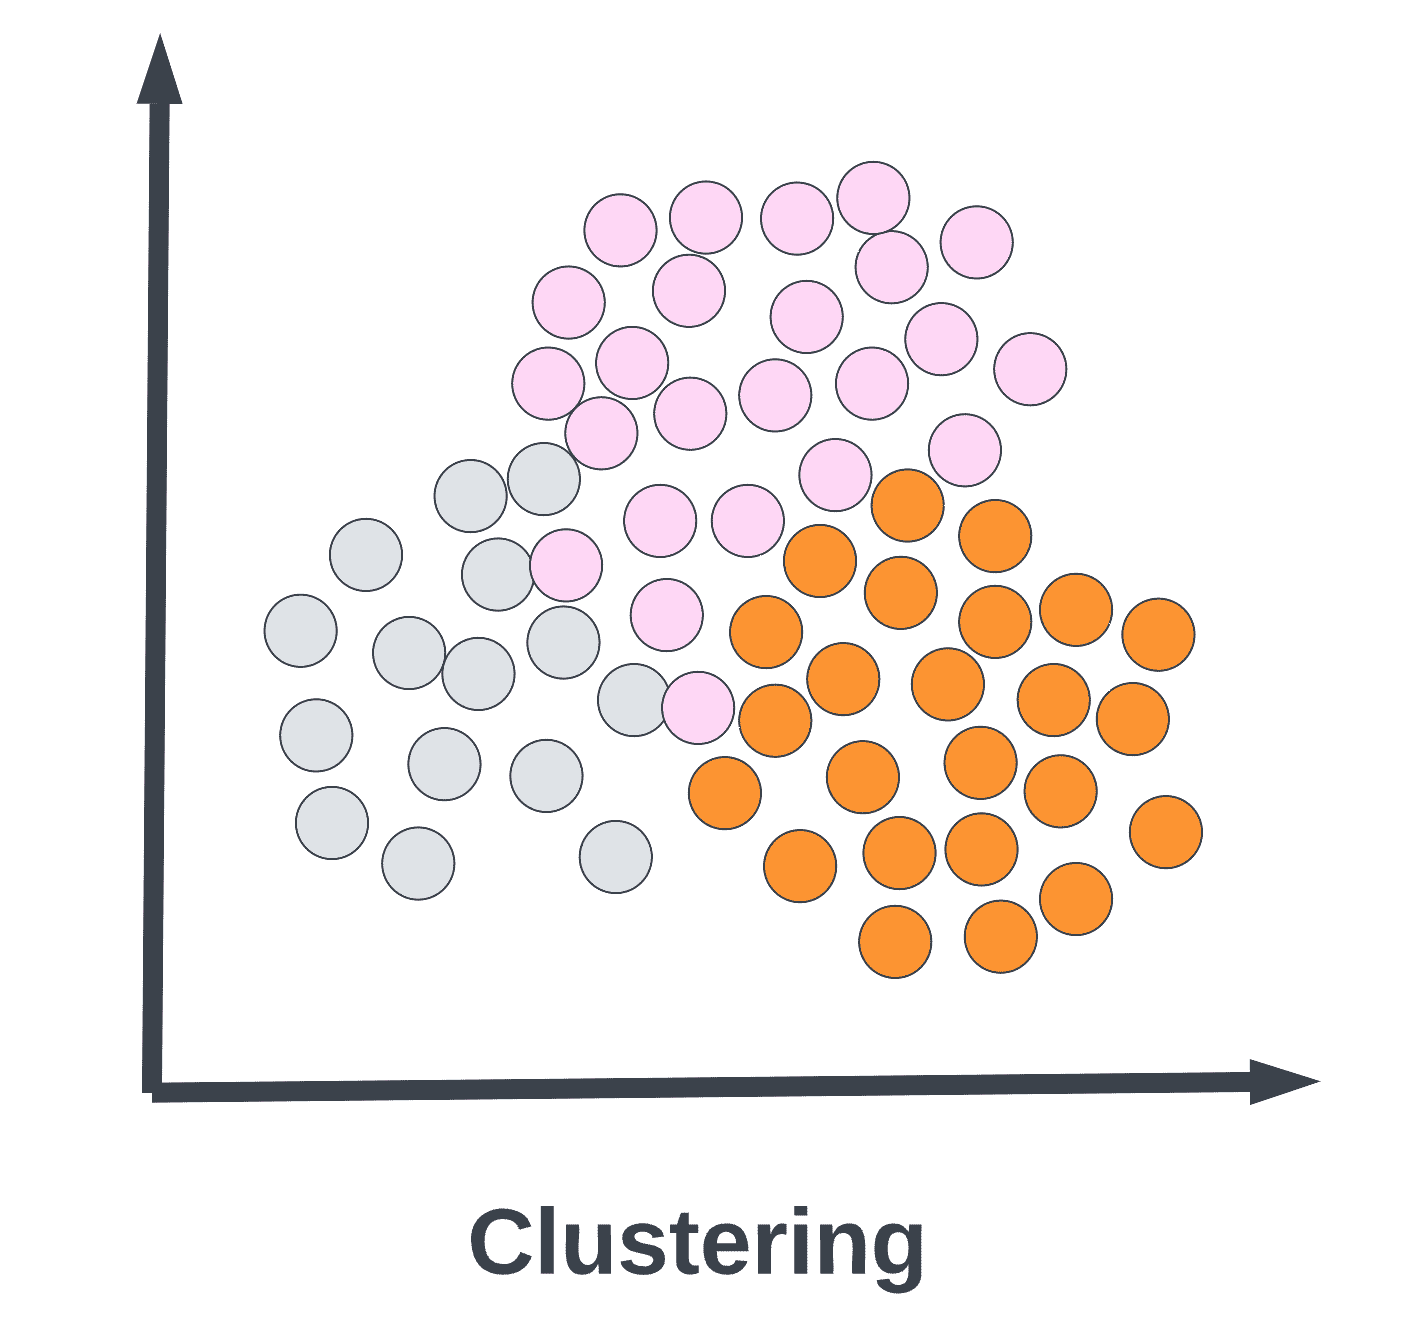 Clustering - Machine Learning Algorithm